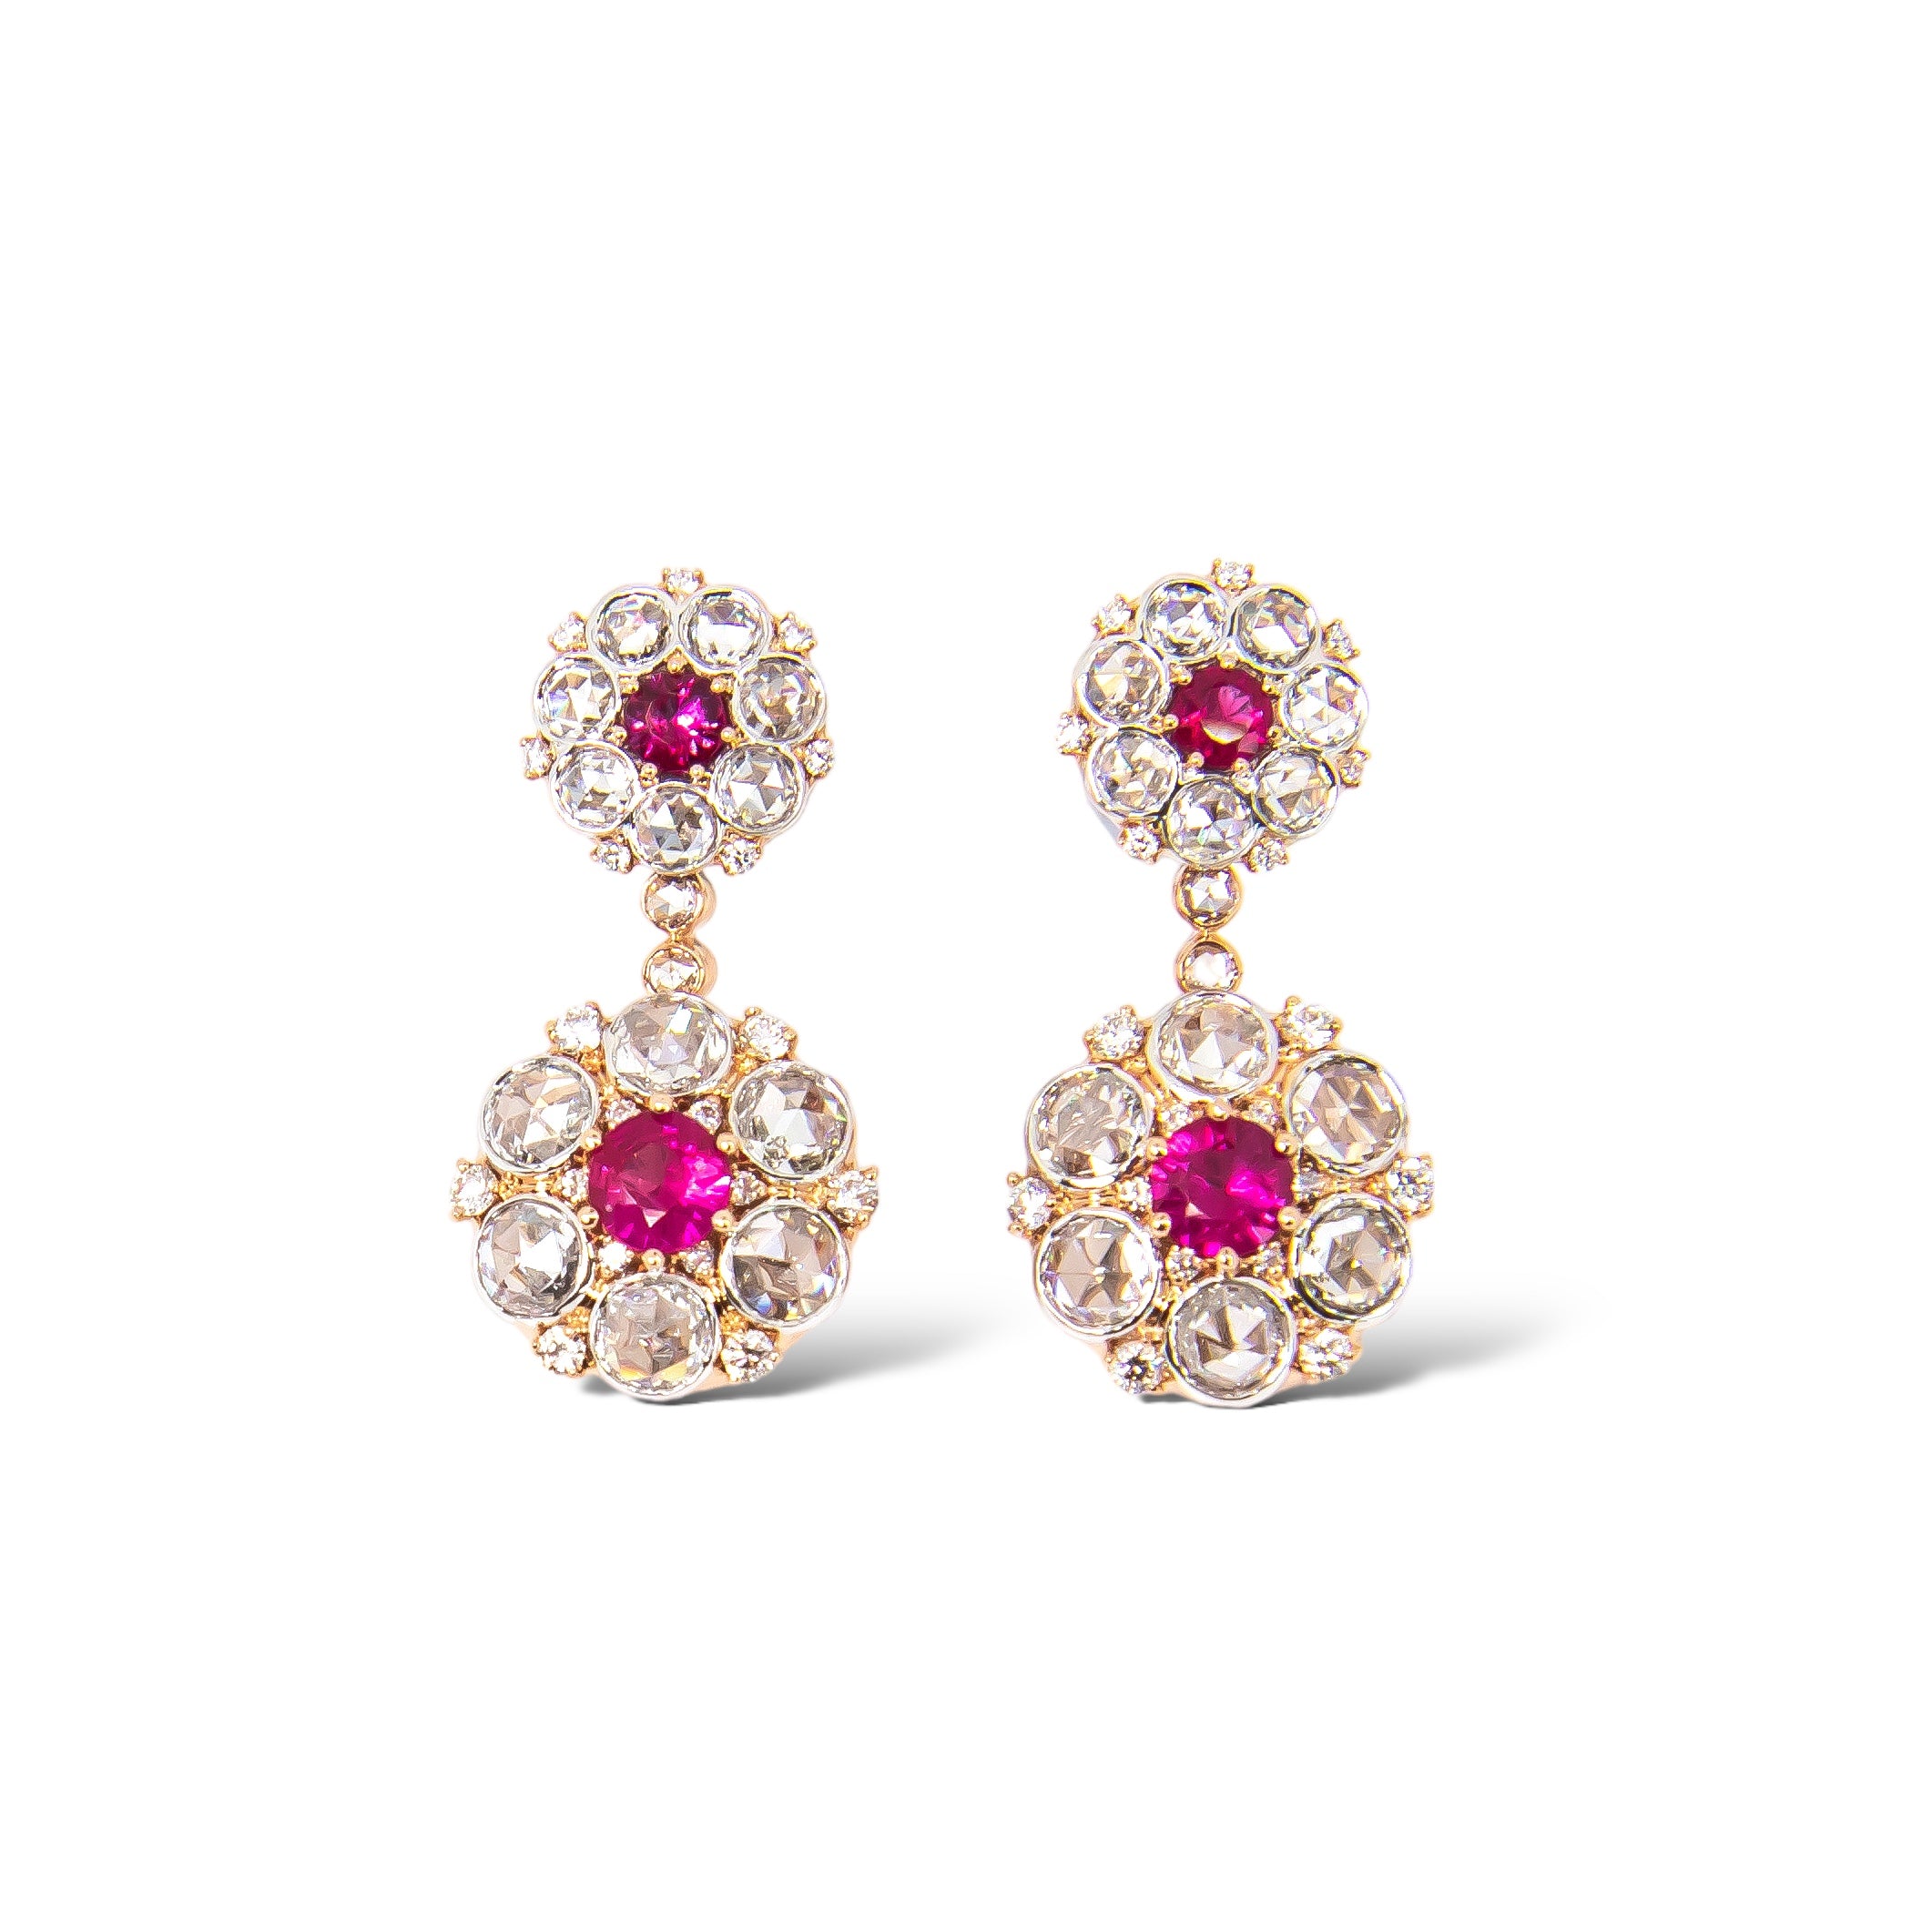 Ruby and rose cut diamond antique cluster style earrings Hong Kong USA. 18K Rose Gold